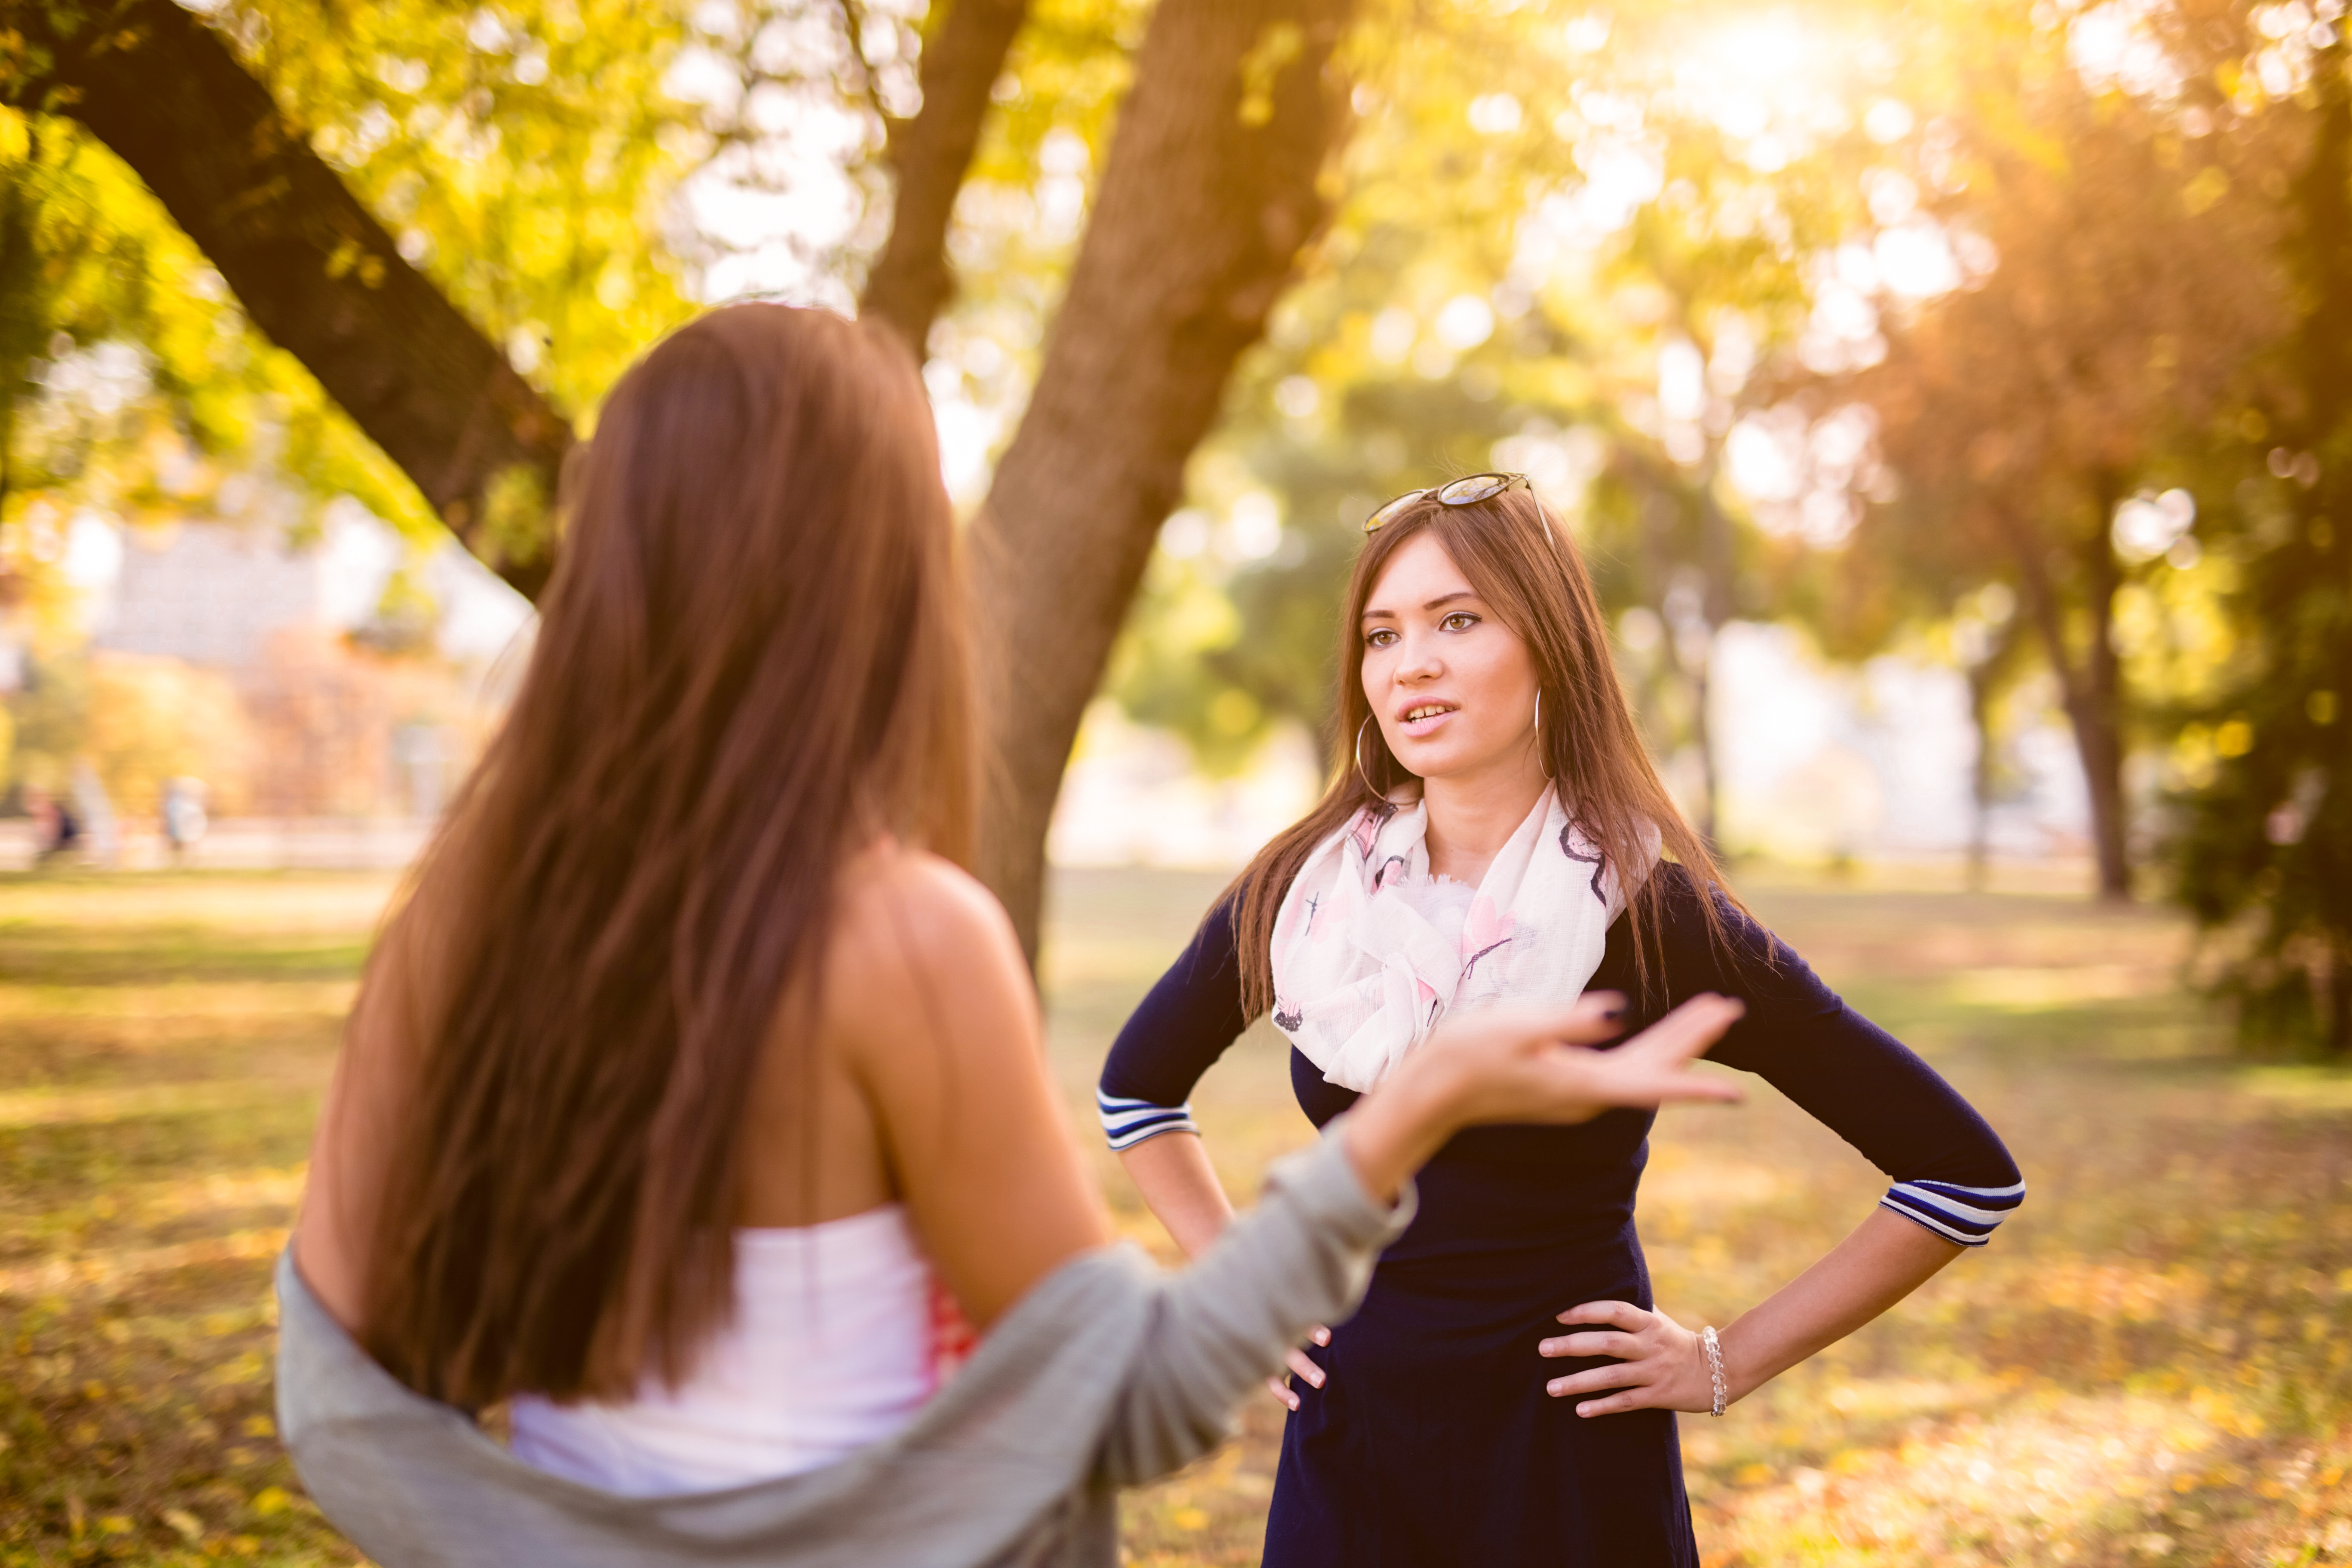 Two women arguing in a park | Source: Getty Images